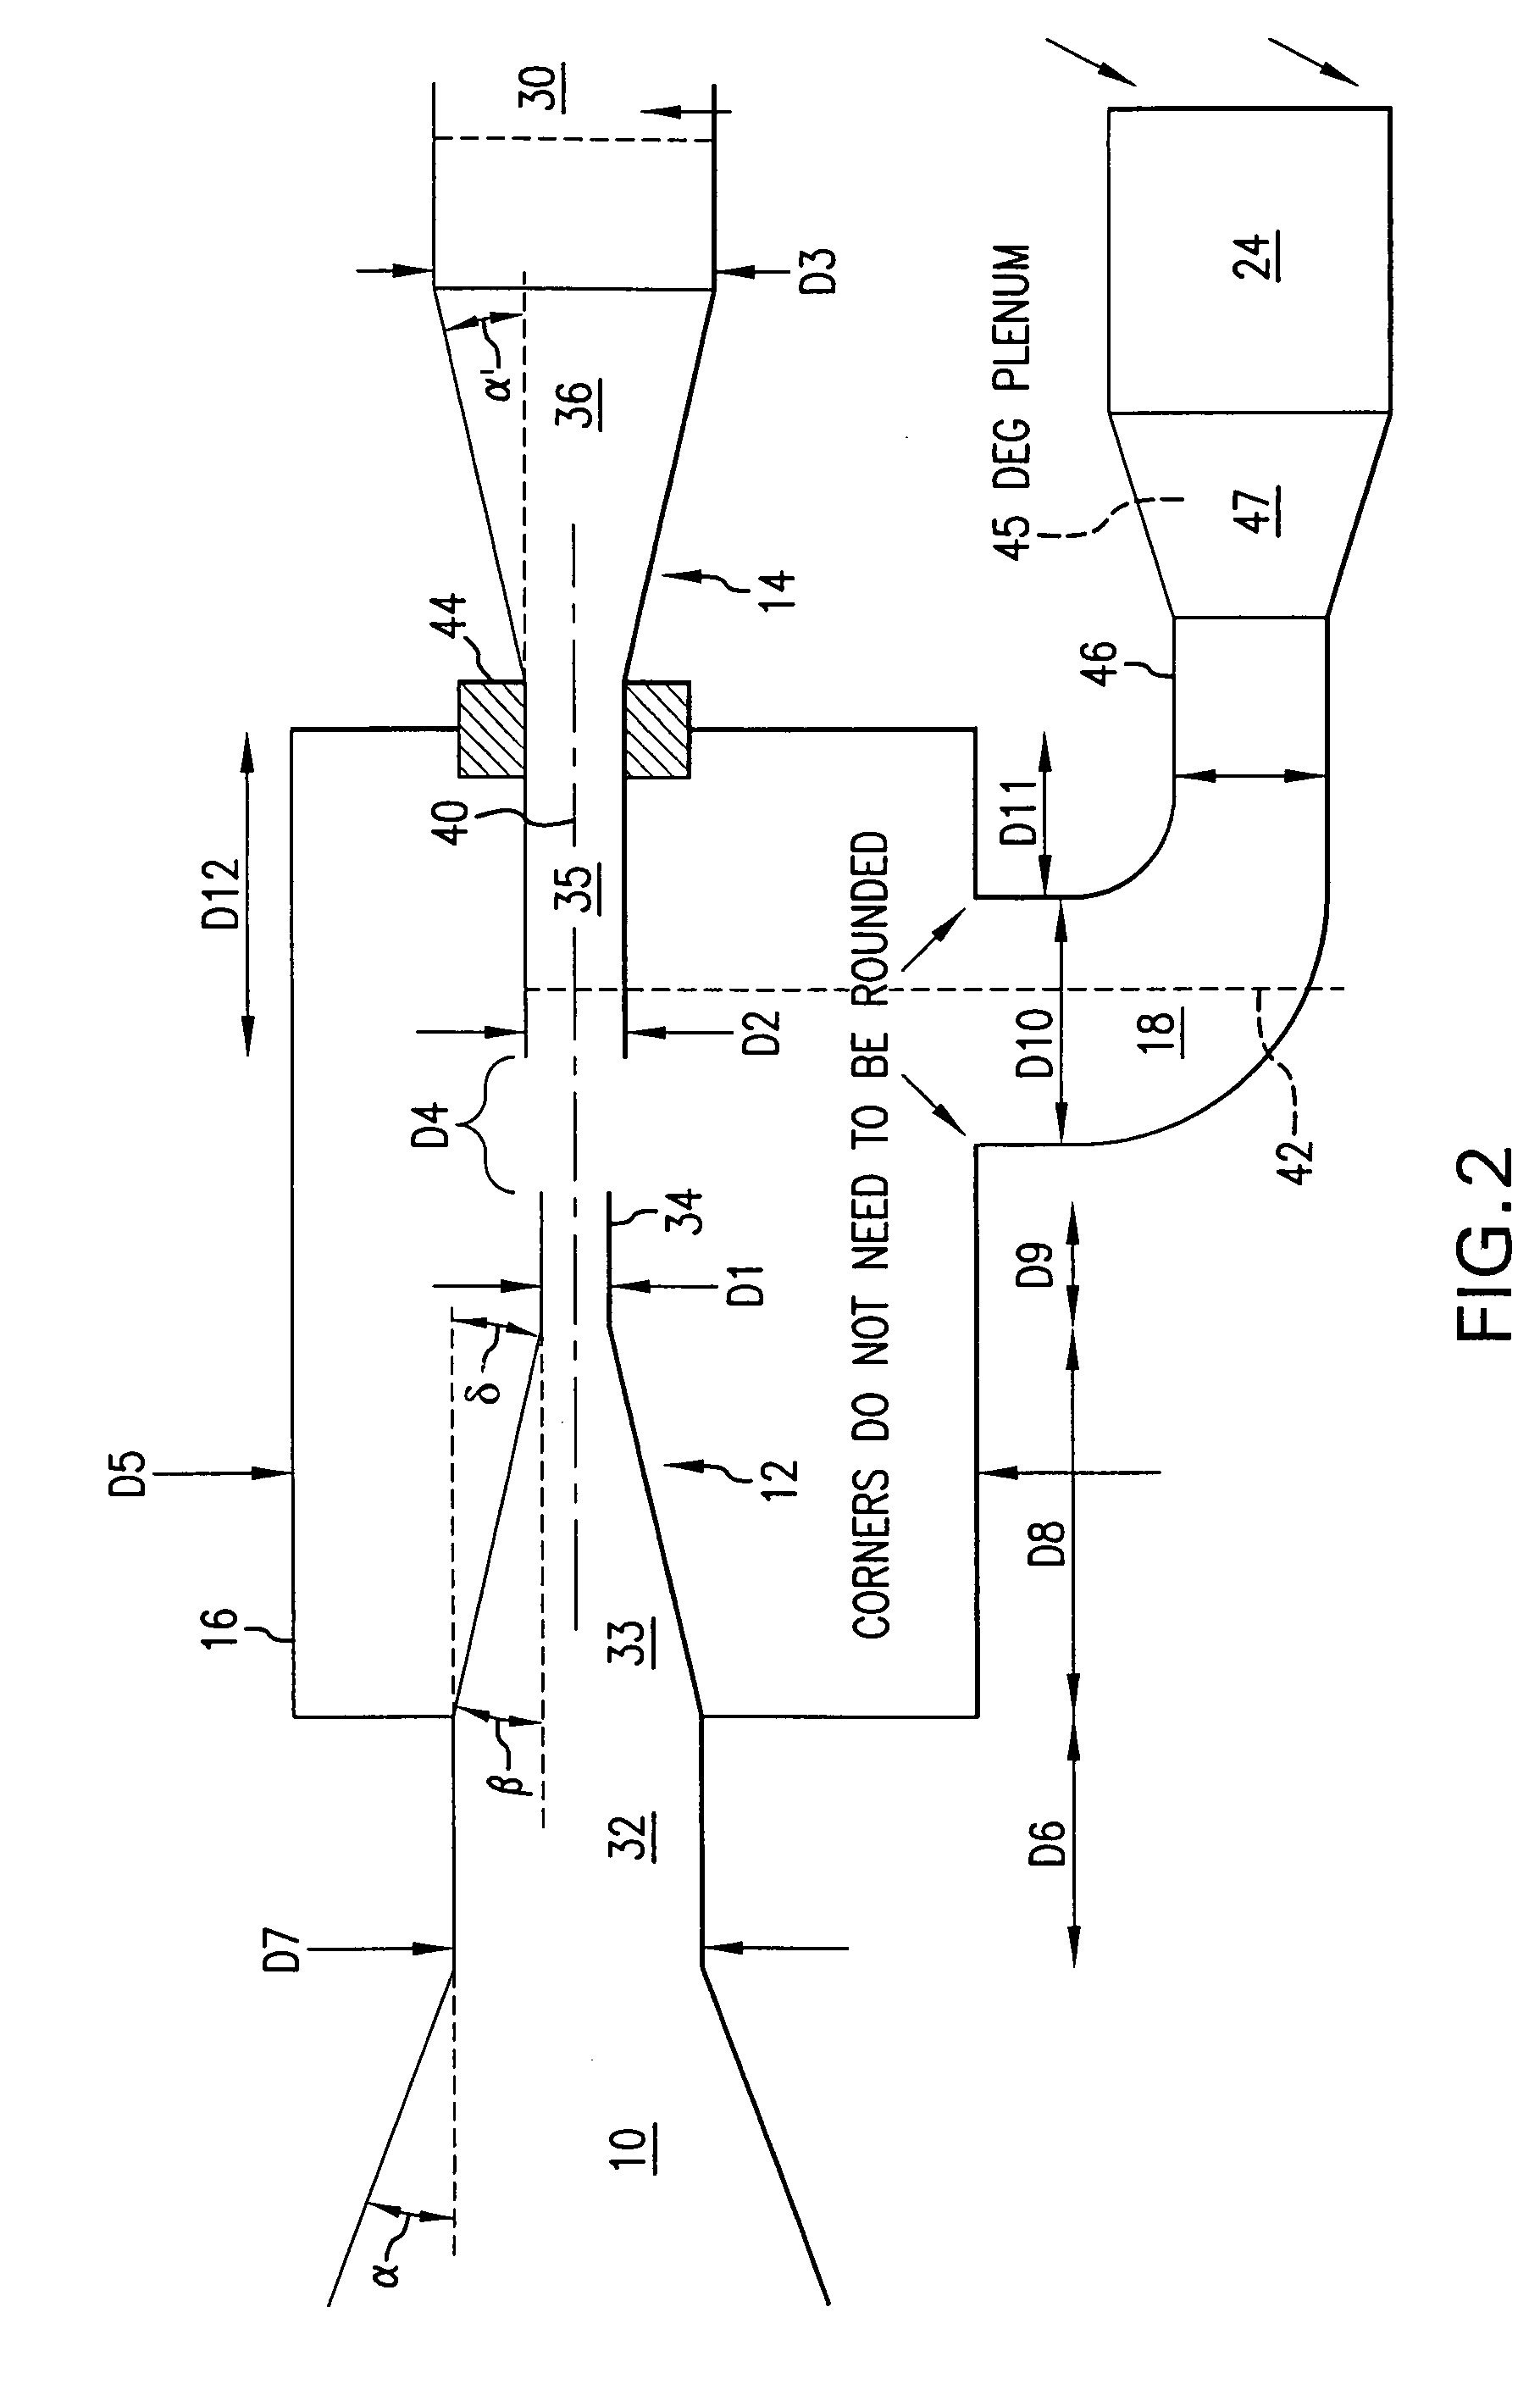 Particle matter sampling method and sampler with a virtual impactor particle concentrator